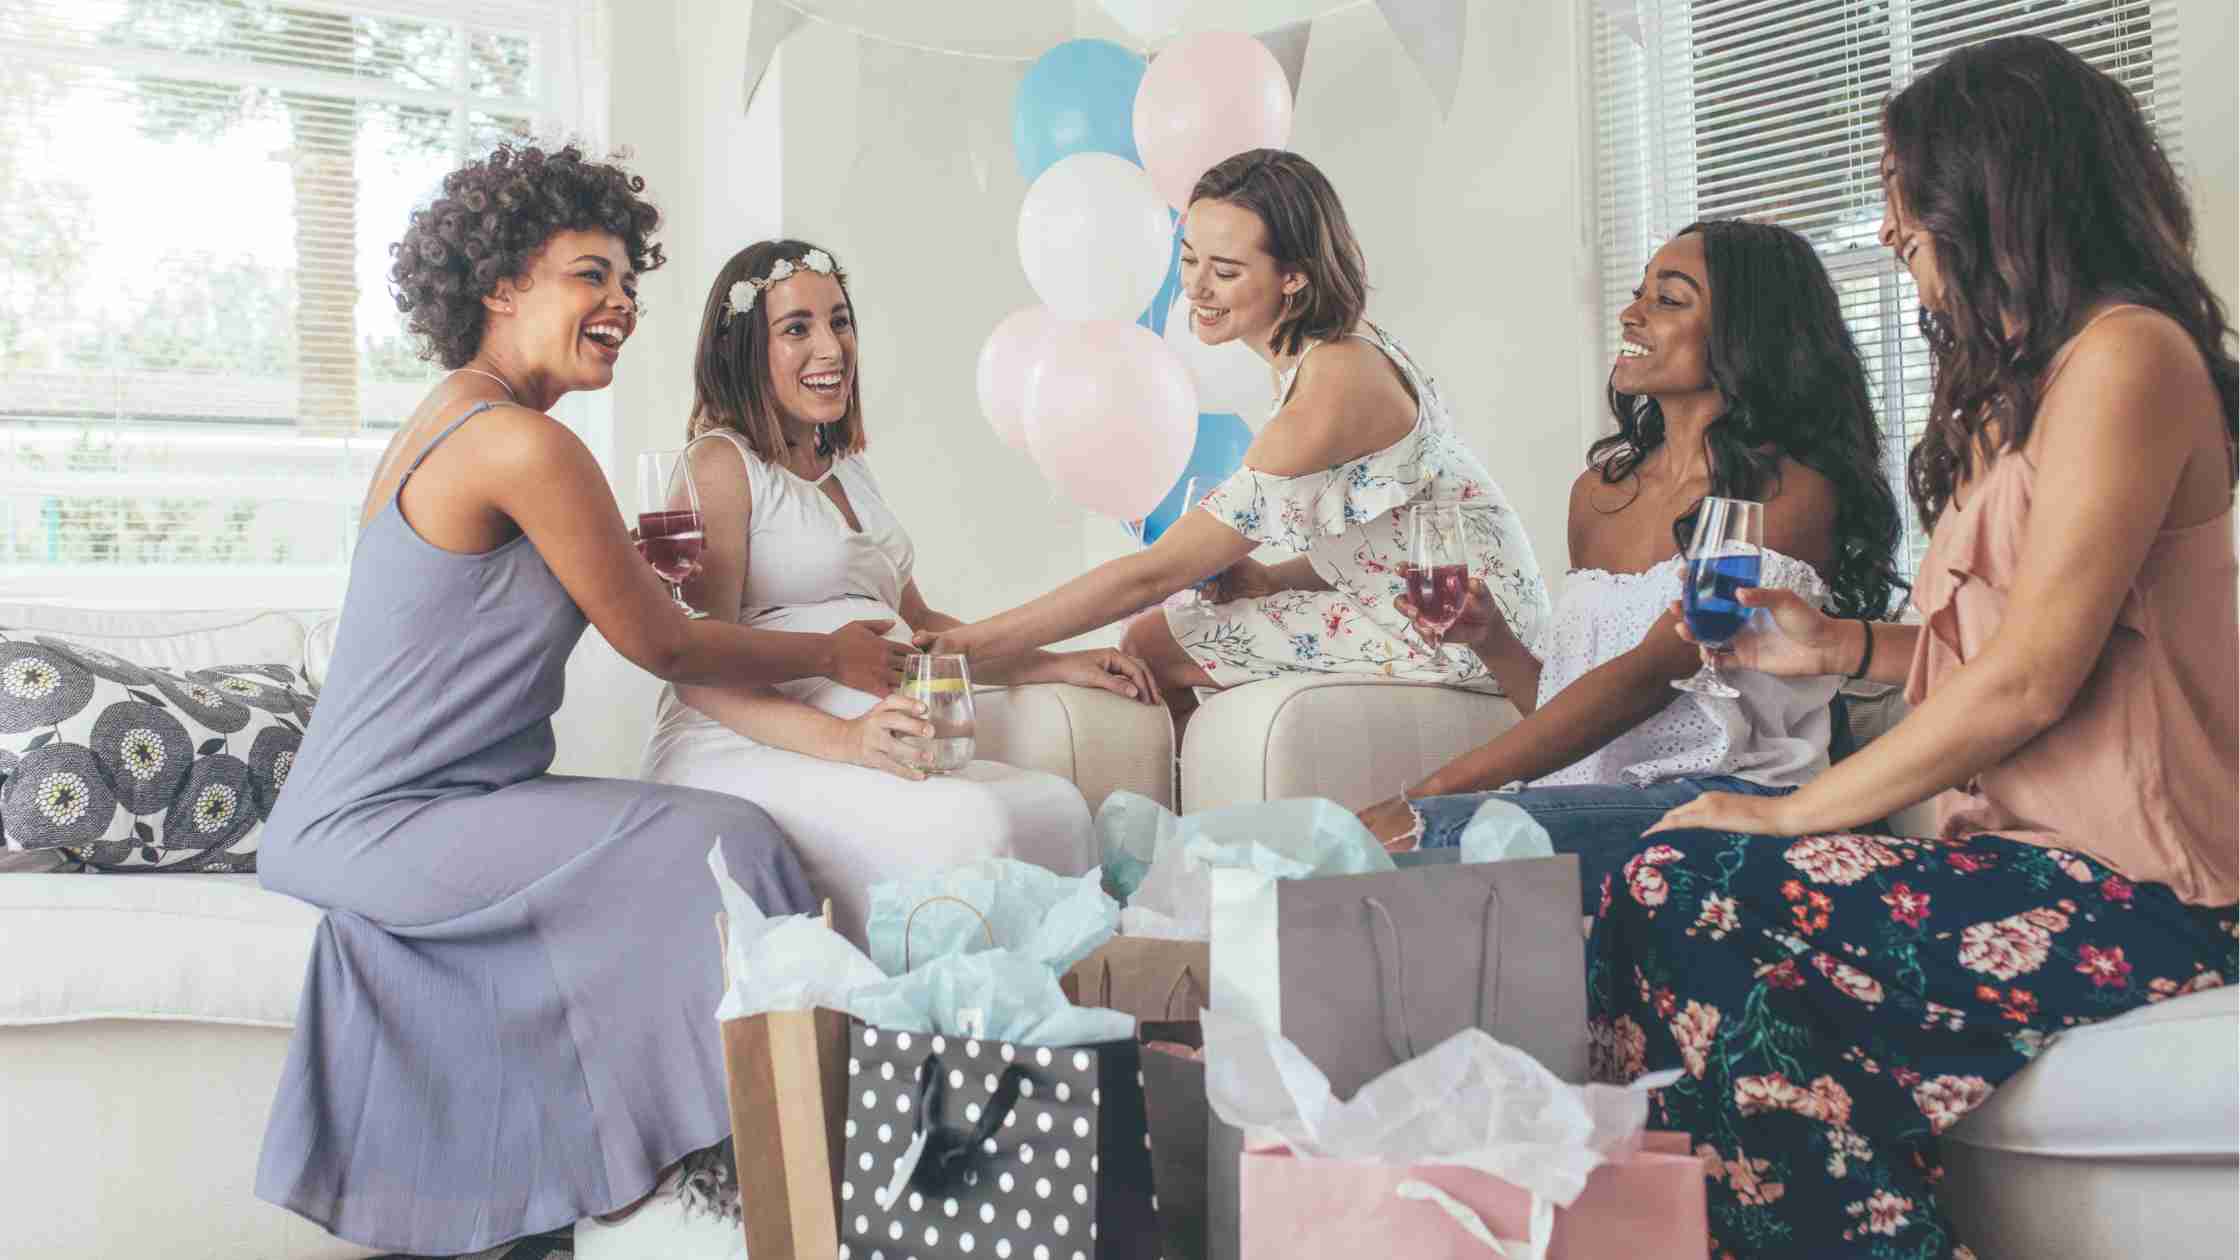 8 Unique Baby Shower Gift Ideas for Expectant Moms